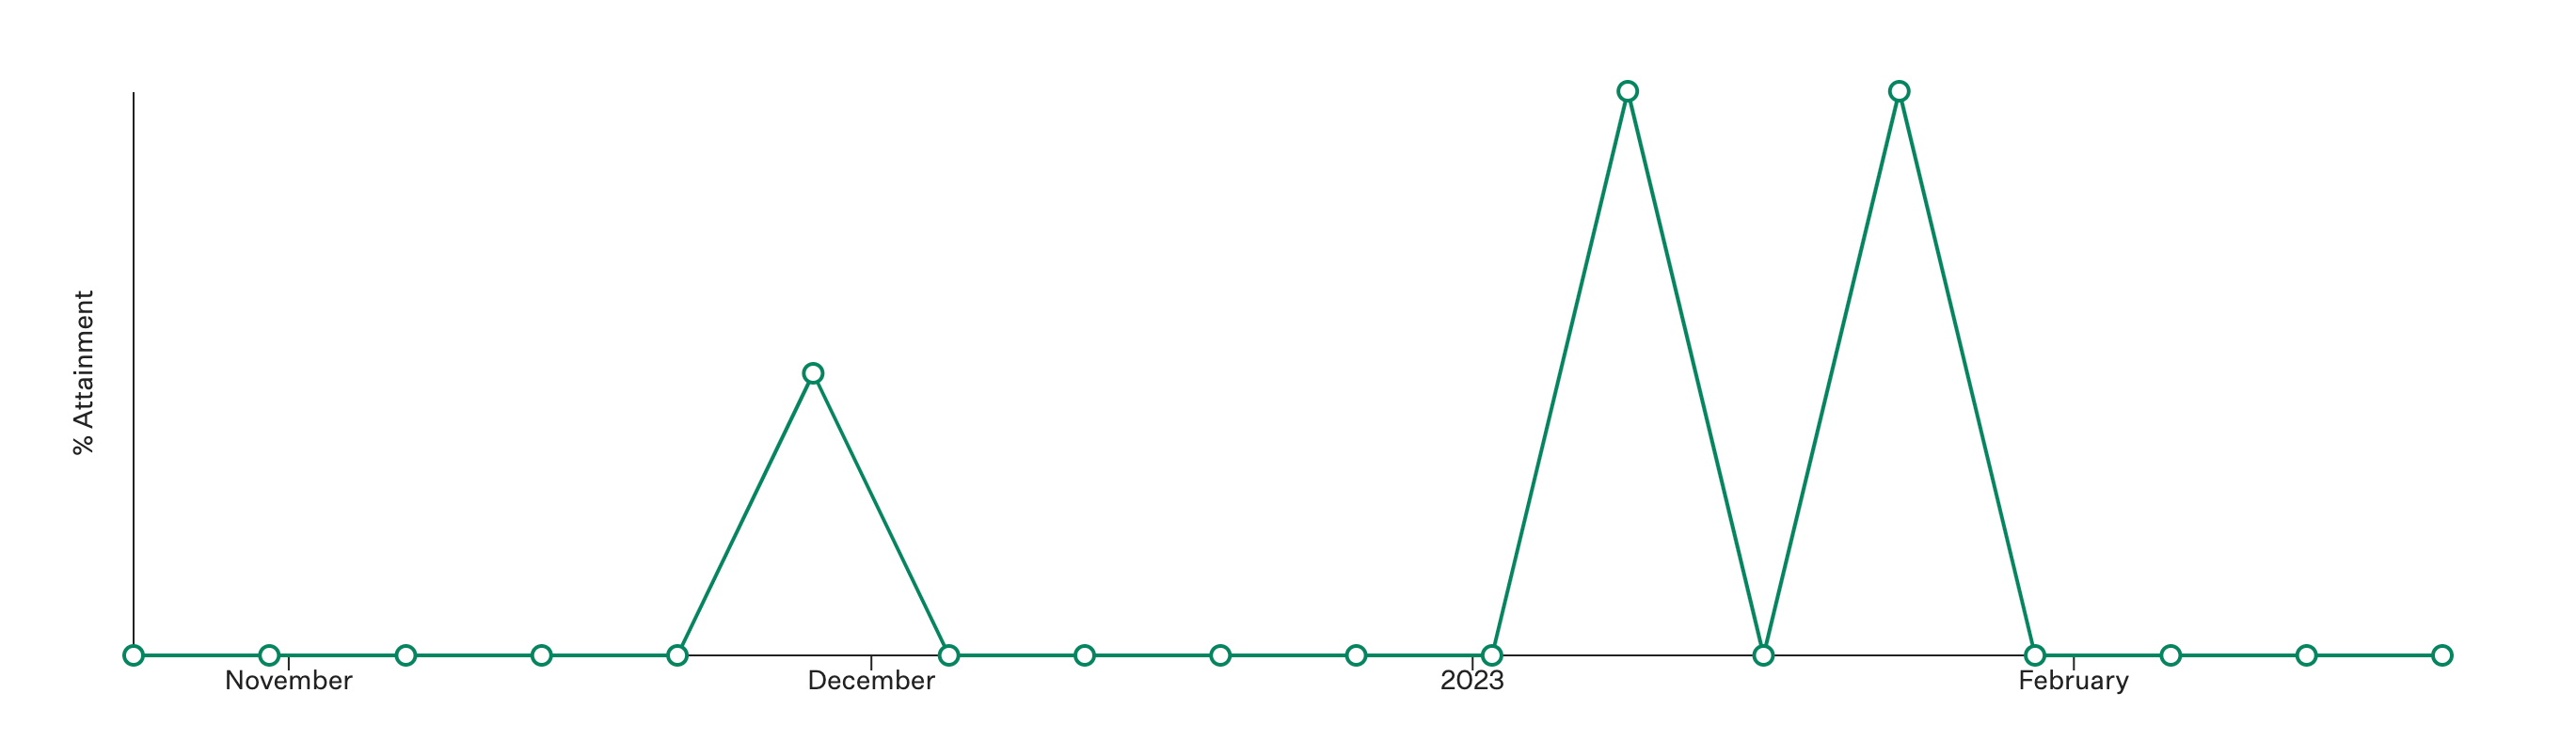 Time-to-review-applications-goal-report-visualization-graph.png